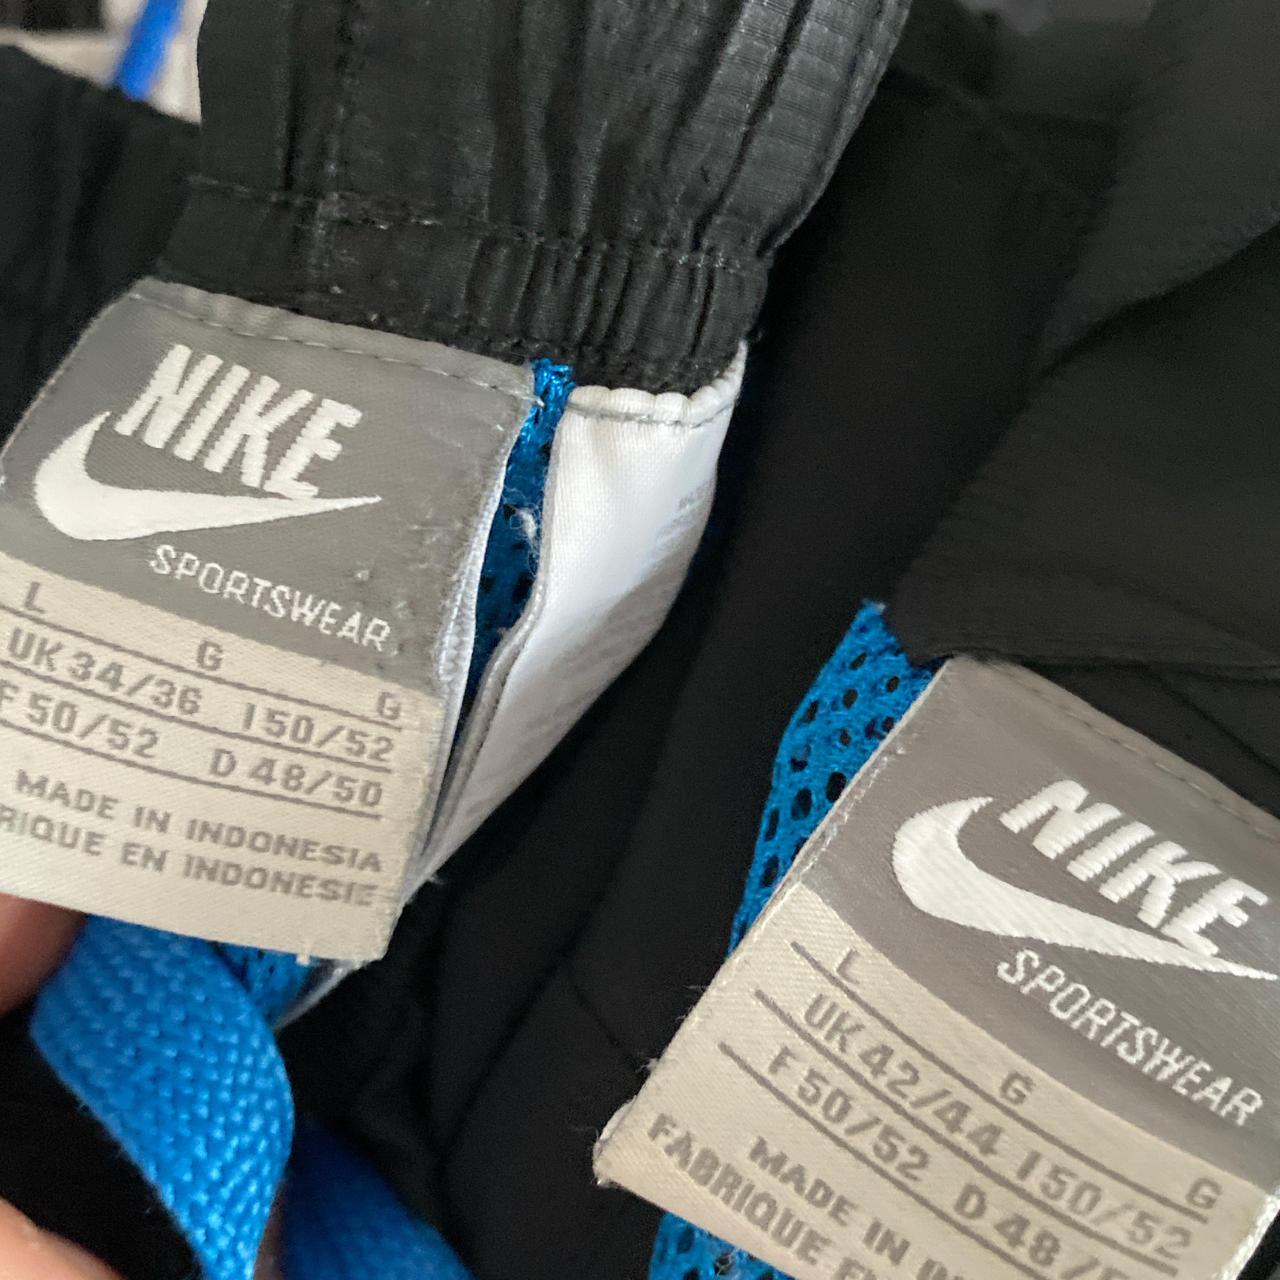 Nike Air Max 95 Black and Blue Shell Windbreaker Tracksuit